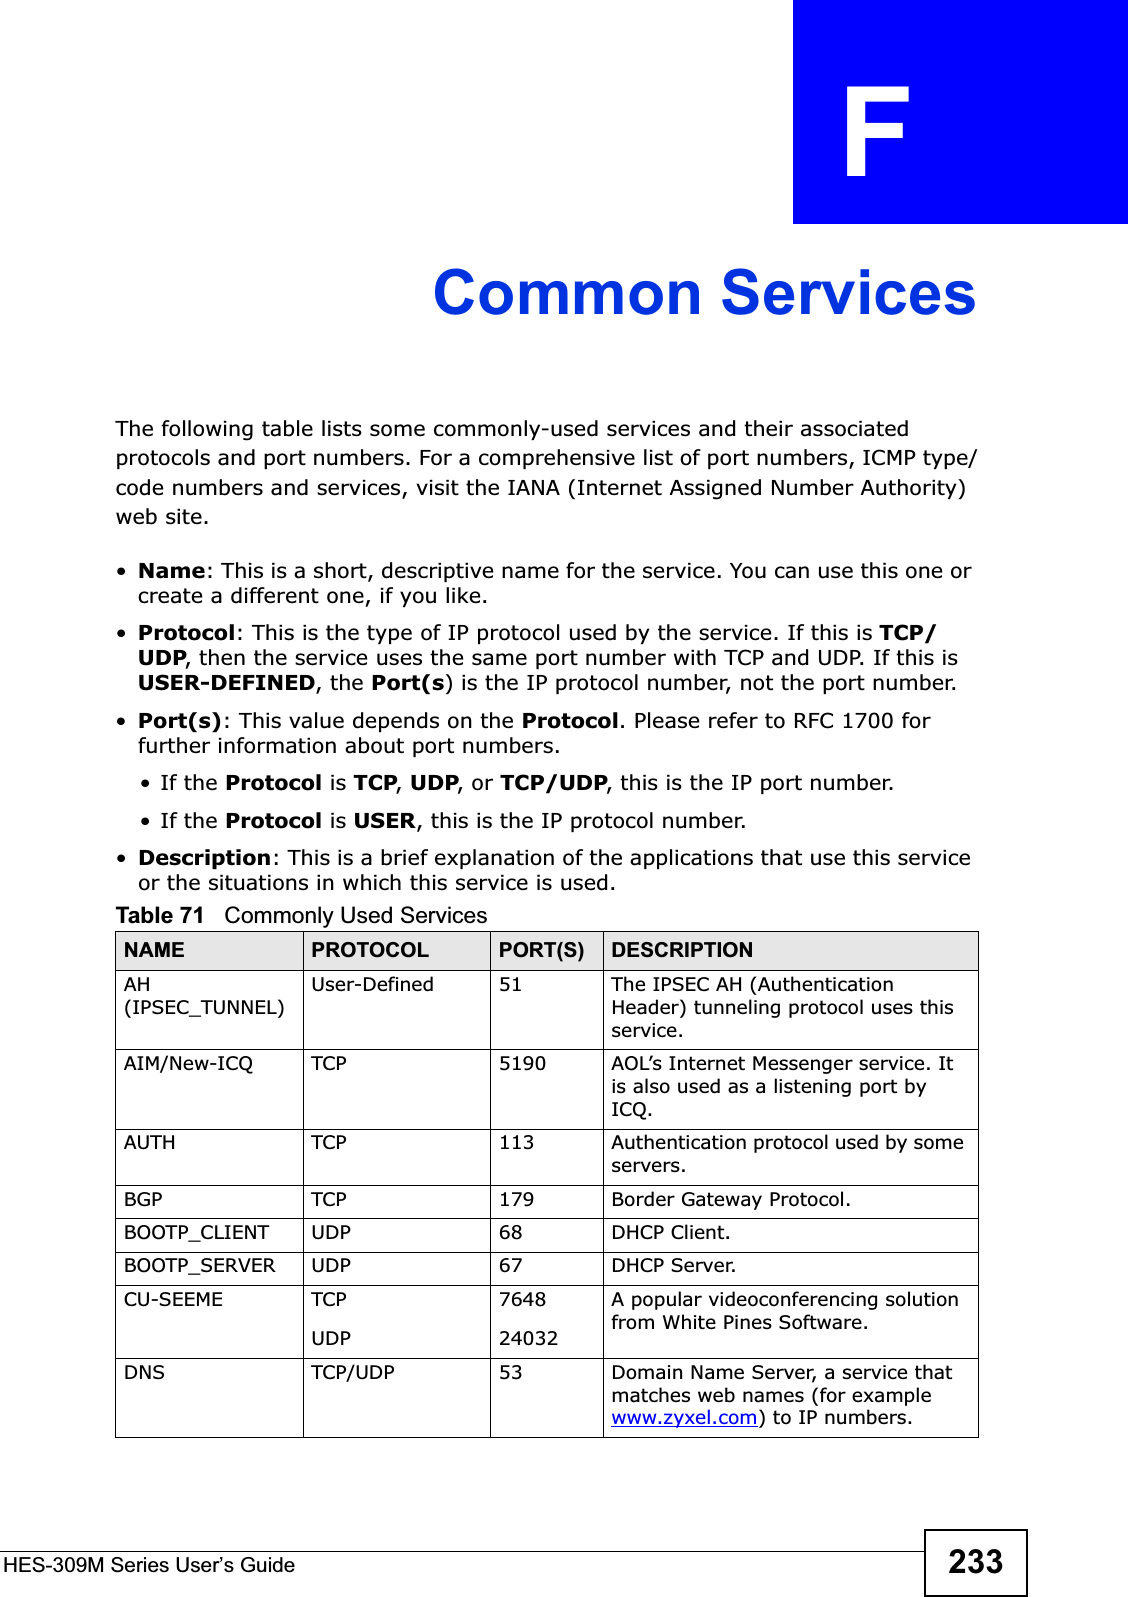 HES-309M Series User’s Guide 233APPENDIX  F Common ServicesThe following table lists some commonly-used services and their associated protocols and port numbers. For a comprehensive list of port numbers, ICMP type/code numbers and services, visit the IANA (Internet Assigned Number Authority) web site. •Name: This is a short, descriptive name for the service. You can use this one or create a different one, if you like.•Protocol: This is the type of IP protocol used by the service. If this is TCP/UDP, then the service uses the same port number with TCP and UDP. If this is USER-DEFINED, the Port(s) is the IP protocol number, not the port number.•Port(s): This value depends on the Protocol. Please refer to RFC 1700 for further information about port numbers.•If the Protocol is TCP,UDP, or TCP/UDP, this is the IP port number.•If the Protocol is USER, this is the IP protocol number.•Description: This is a brief explanation of the applications that use this service or the situations in which this service is used.Table 71   Commonly Used ServicesNAME PROTOCOL PORT(S) DESCRIPTIONAH(IPSEC_TUNNEL)User-Defined 51 The IPSEC AH (Authentication Header) tunneling protocol uses this service.AIM/New-ICQ TCP 5190 AOL’s Internet Messenger service. It is also used as a listening port by ICQ.AUTH TCP 113 Authentication protocol used by some servers.BGP TCP 179 Border Gateway Protocol.BOOTP_CLIENT UDP 68 DHCP Client.BOOTP_SERVER UDP 67 DHCP Server.CU-SEEME TCPUDP764824032A popular videoconferencing solution from White Pines Software.DNS TCP/UDP 53 Domain Name Server, a service that matches web names (for example www.zyxel.com) to IP numbers.